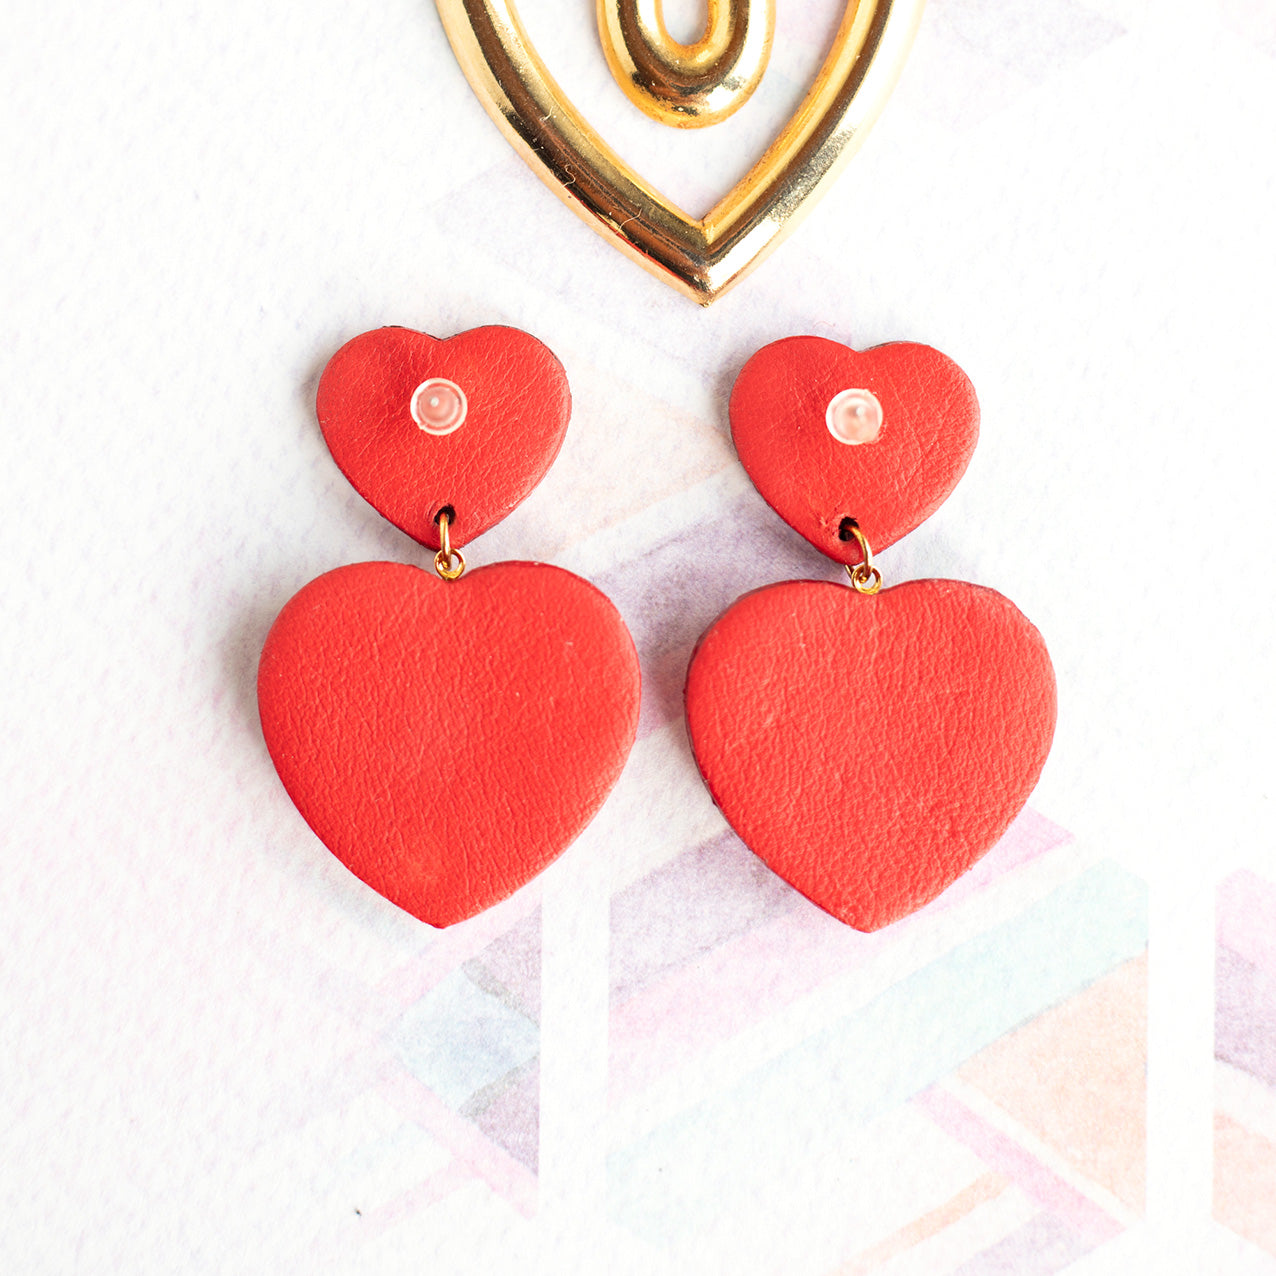 Sacré Coeur metallic red and old gold earrings